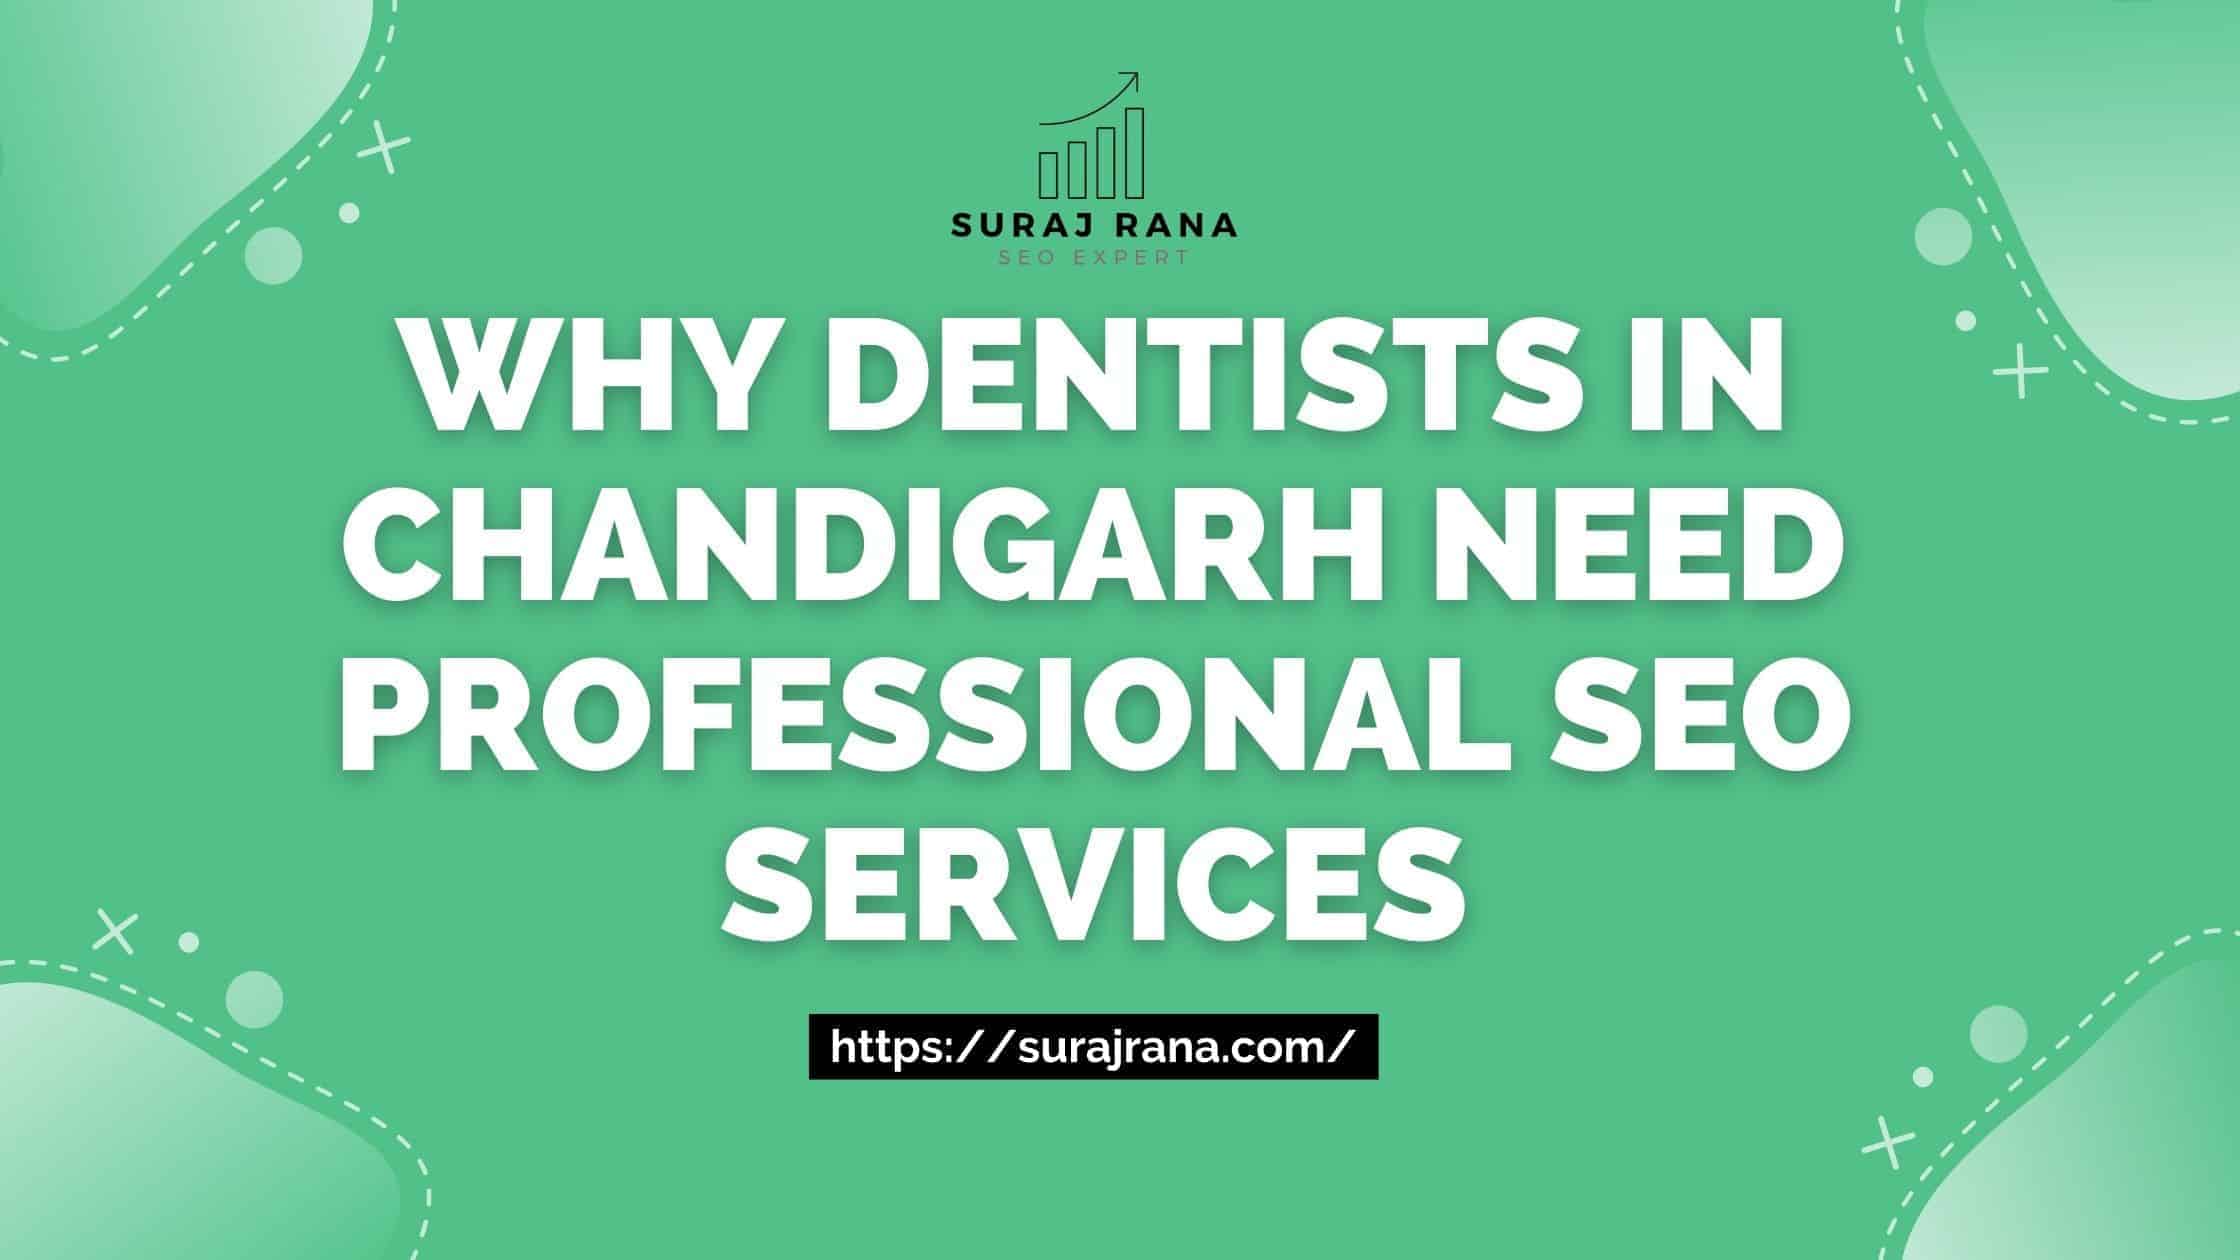 Why Dentists in Chandigarh Need Professional SEO Services